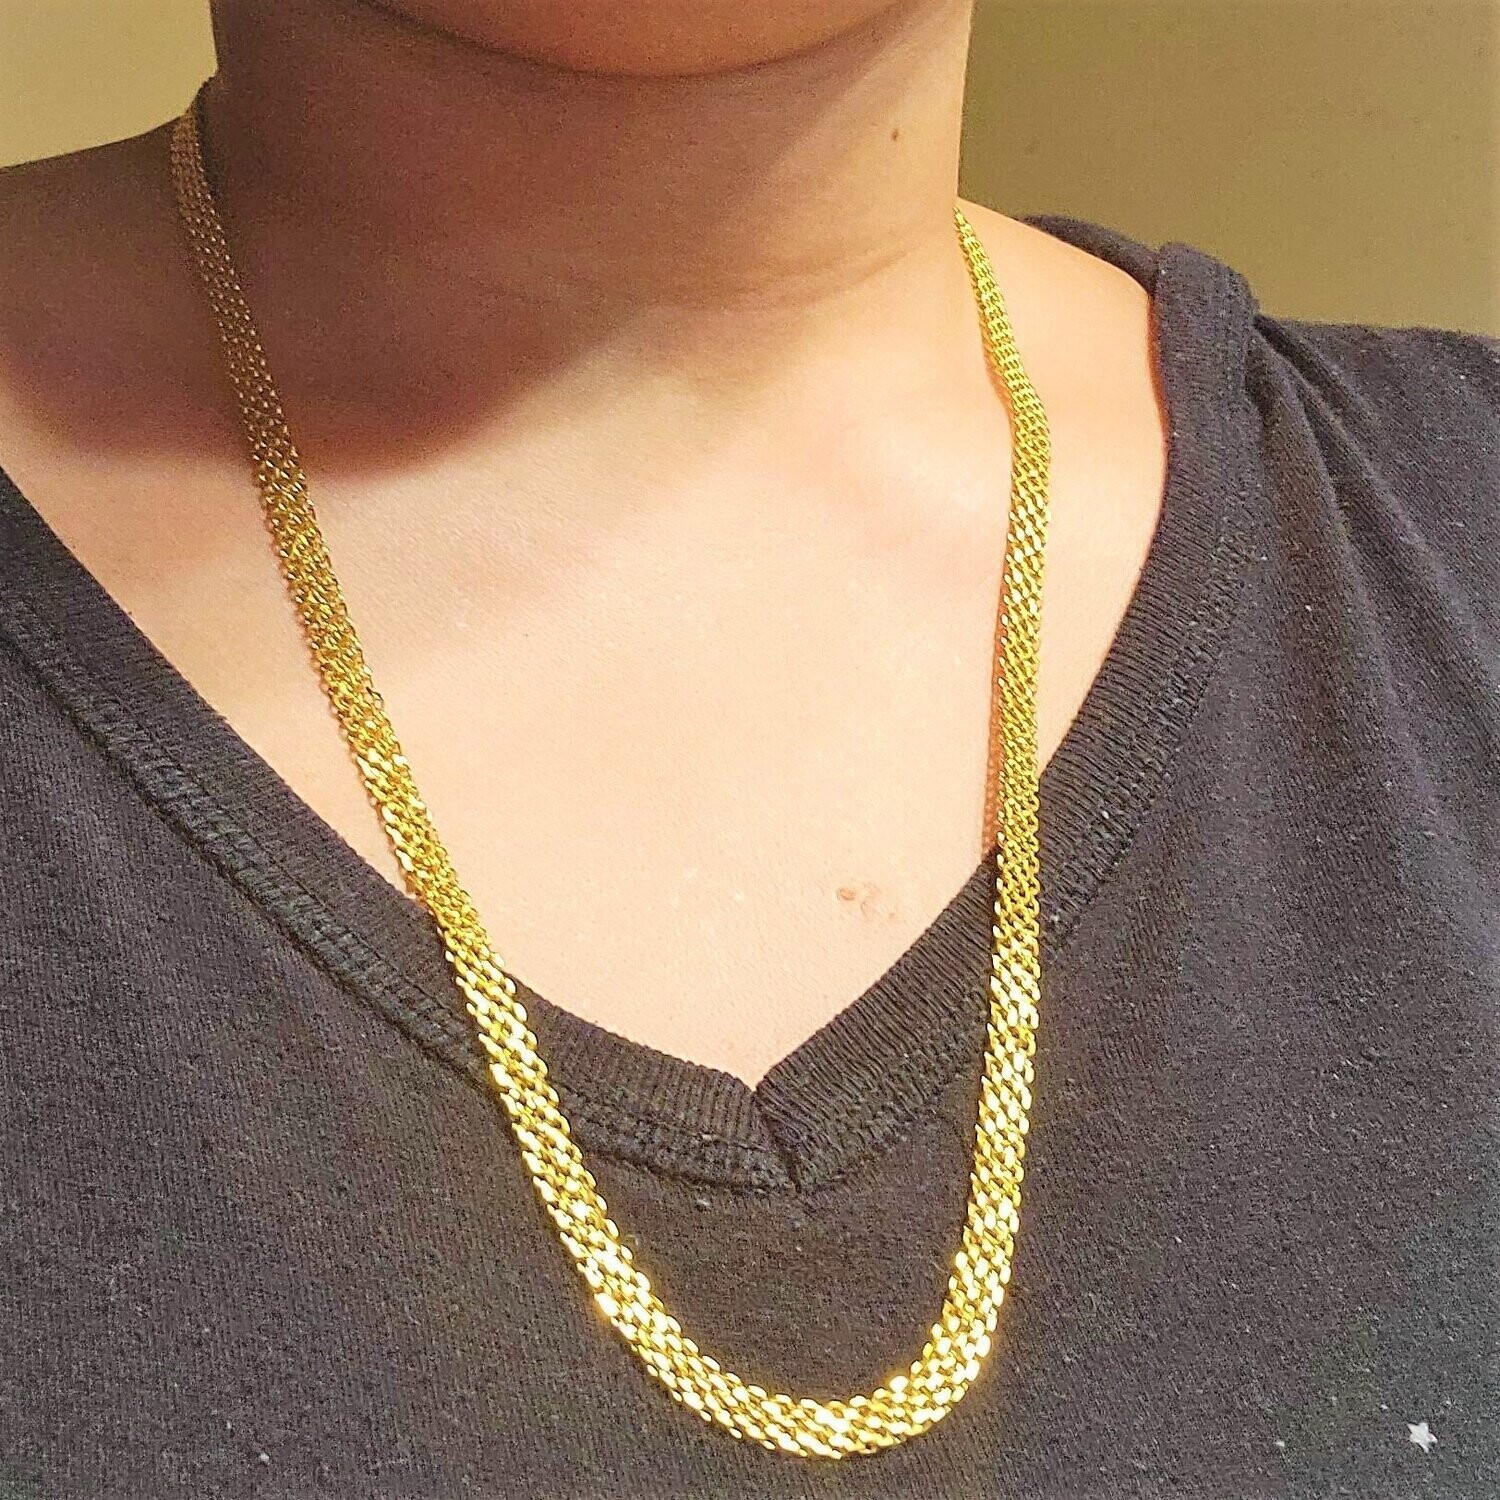 Jewelry Gold Chain Necklace Collection - 14K Solid Yellow Gold Filled Round Wheat/Palm Chain Necklaces for Women and Men with Different Sizes (5-6mm) 22 inch length